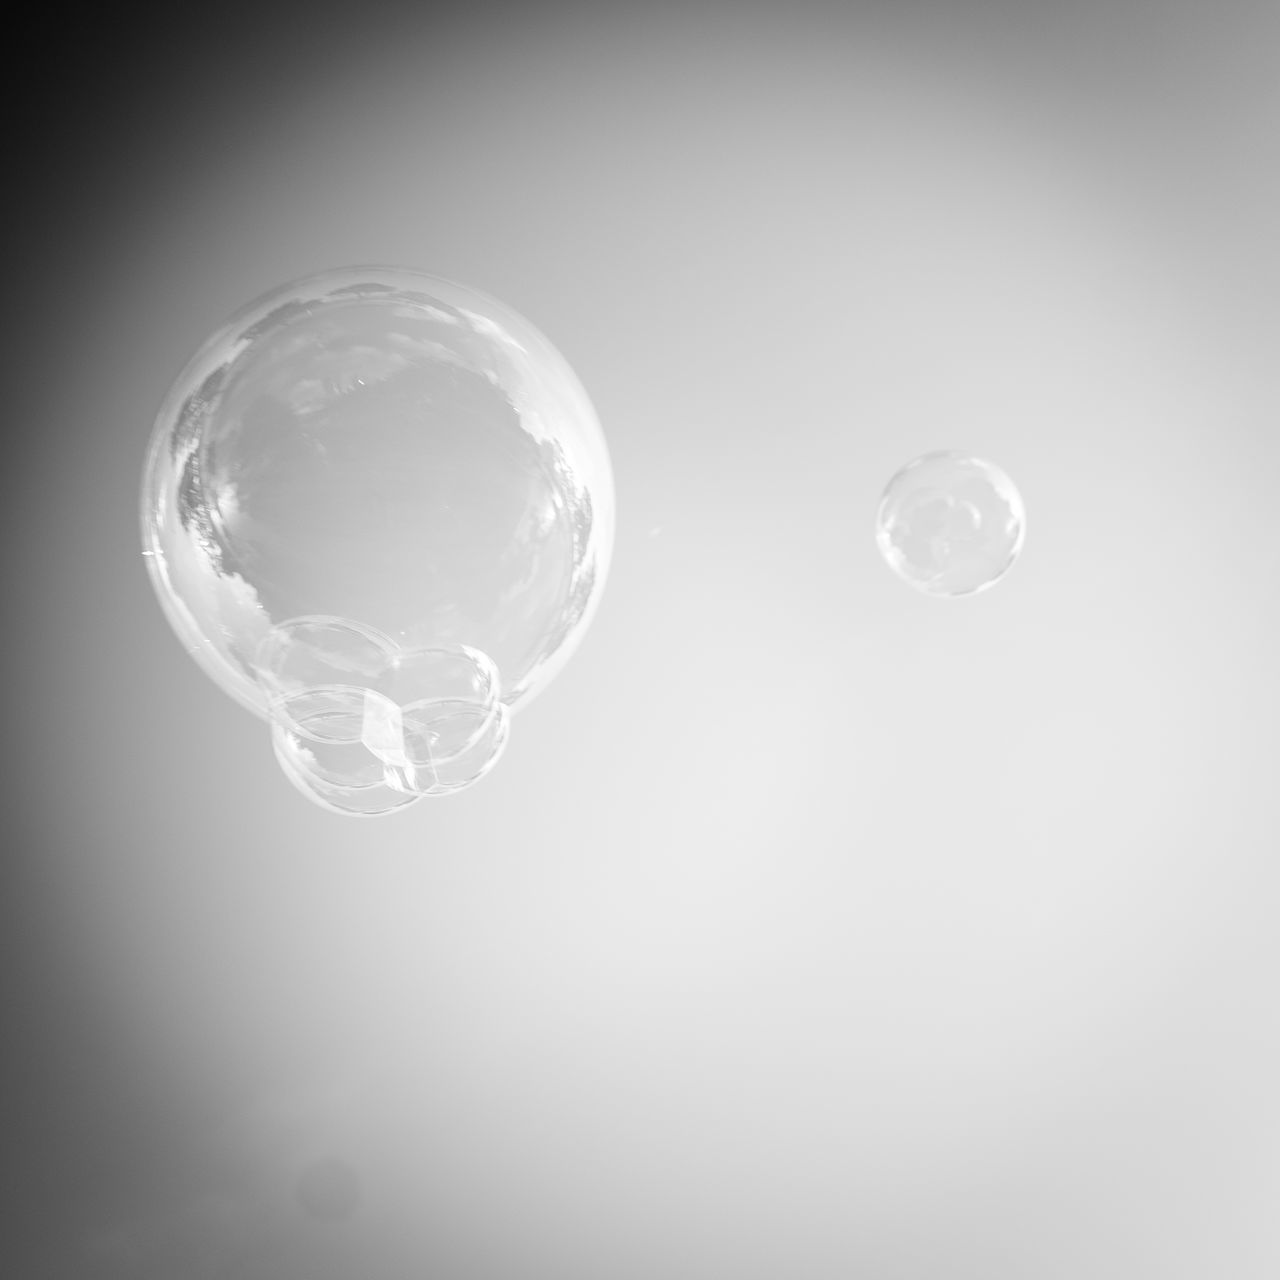 circle, bubble, sphere, transparent, mid-air, no people, studio shot, indoors, fragility, nature, copy space, light, shape, black and white, geometric shape, soap sud, reflection, close-up, glass